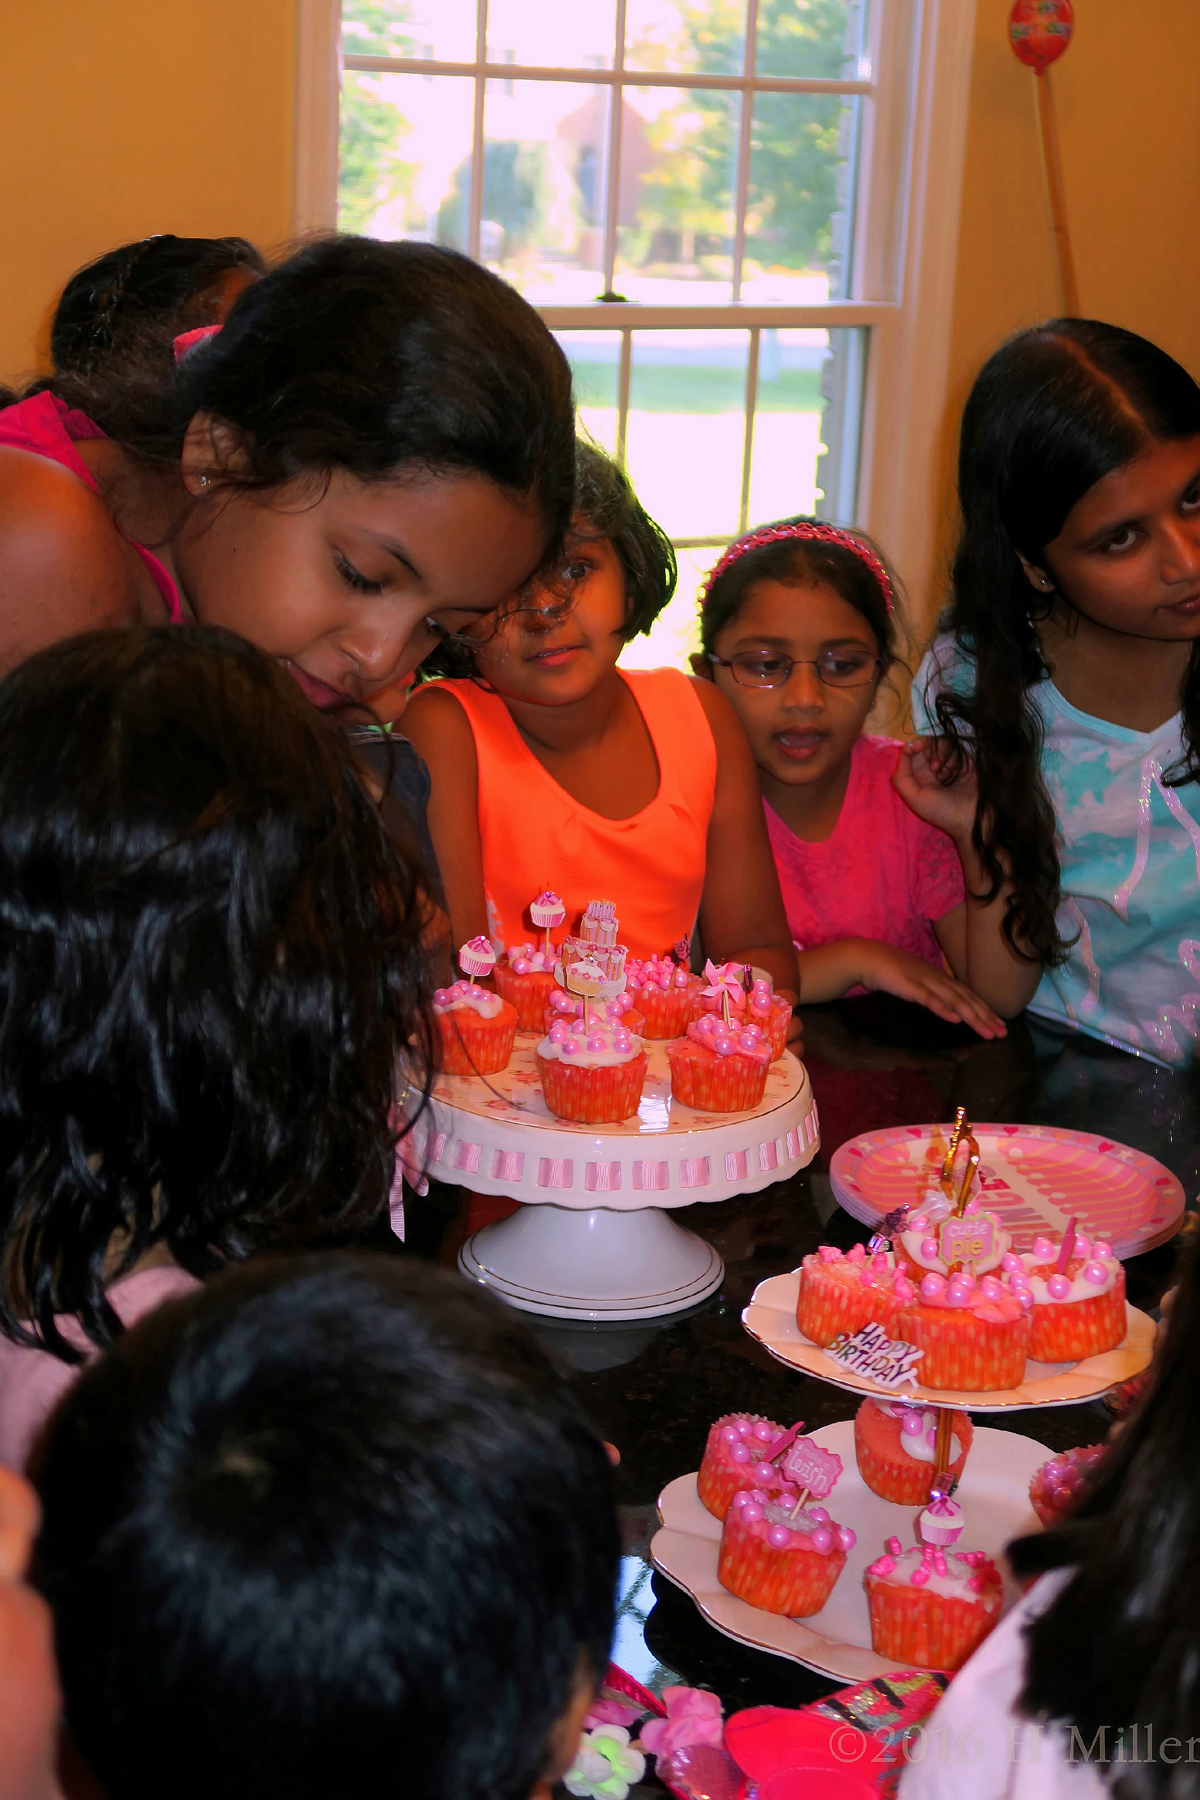 Cakes Cupcakes And More At The Kids Spa!! 